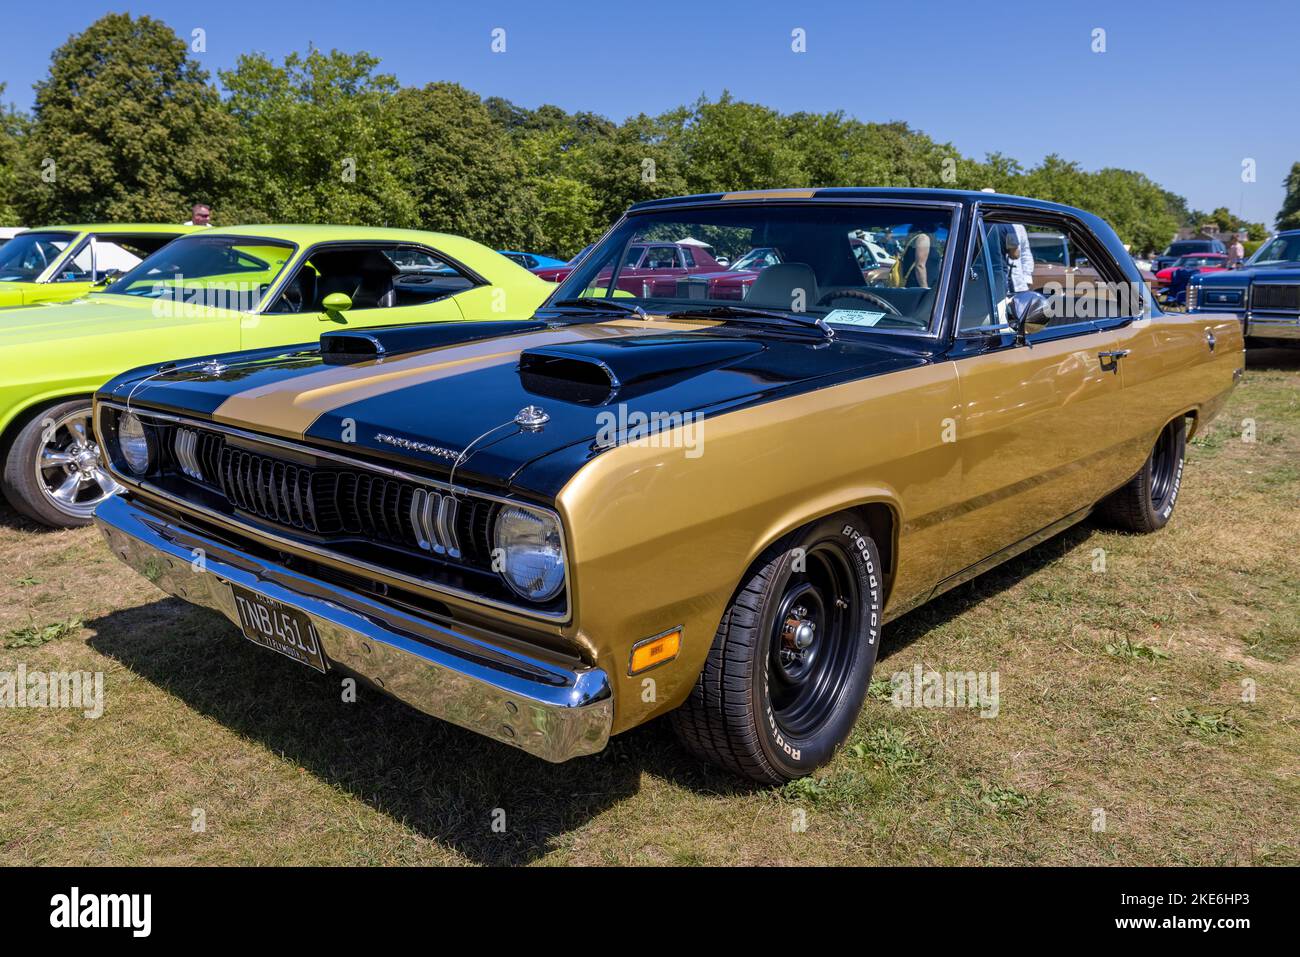 1971 Plymouth Scamp ‘TNB 451J’ in mostra all’American Auto Club Rally of the Giants, tenutosi a Blenheim Palace il 10th luglio 2022 Foto Stock